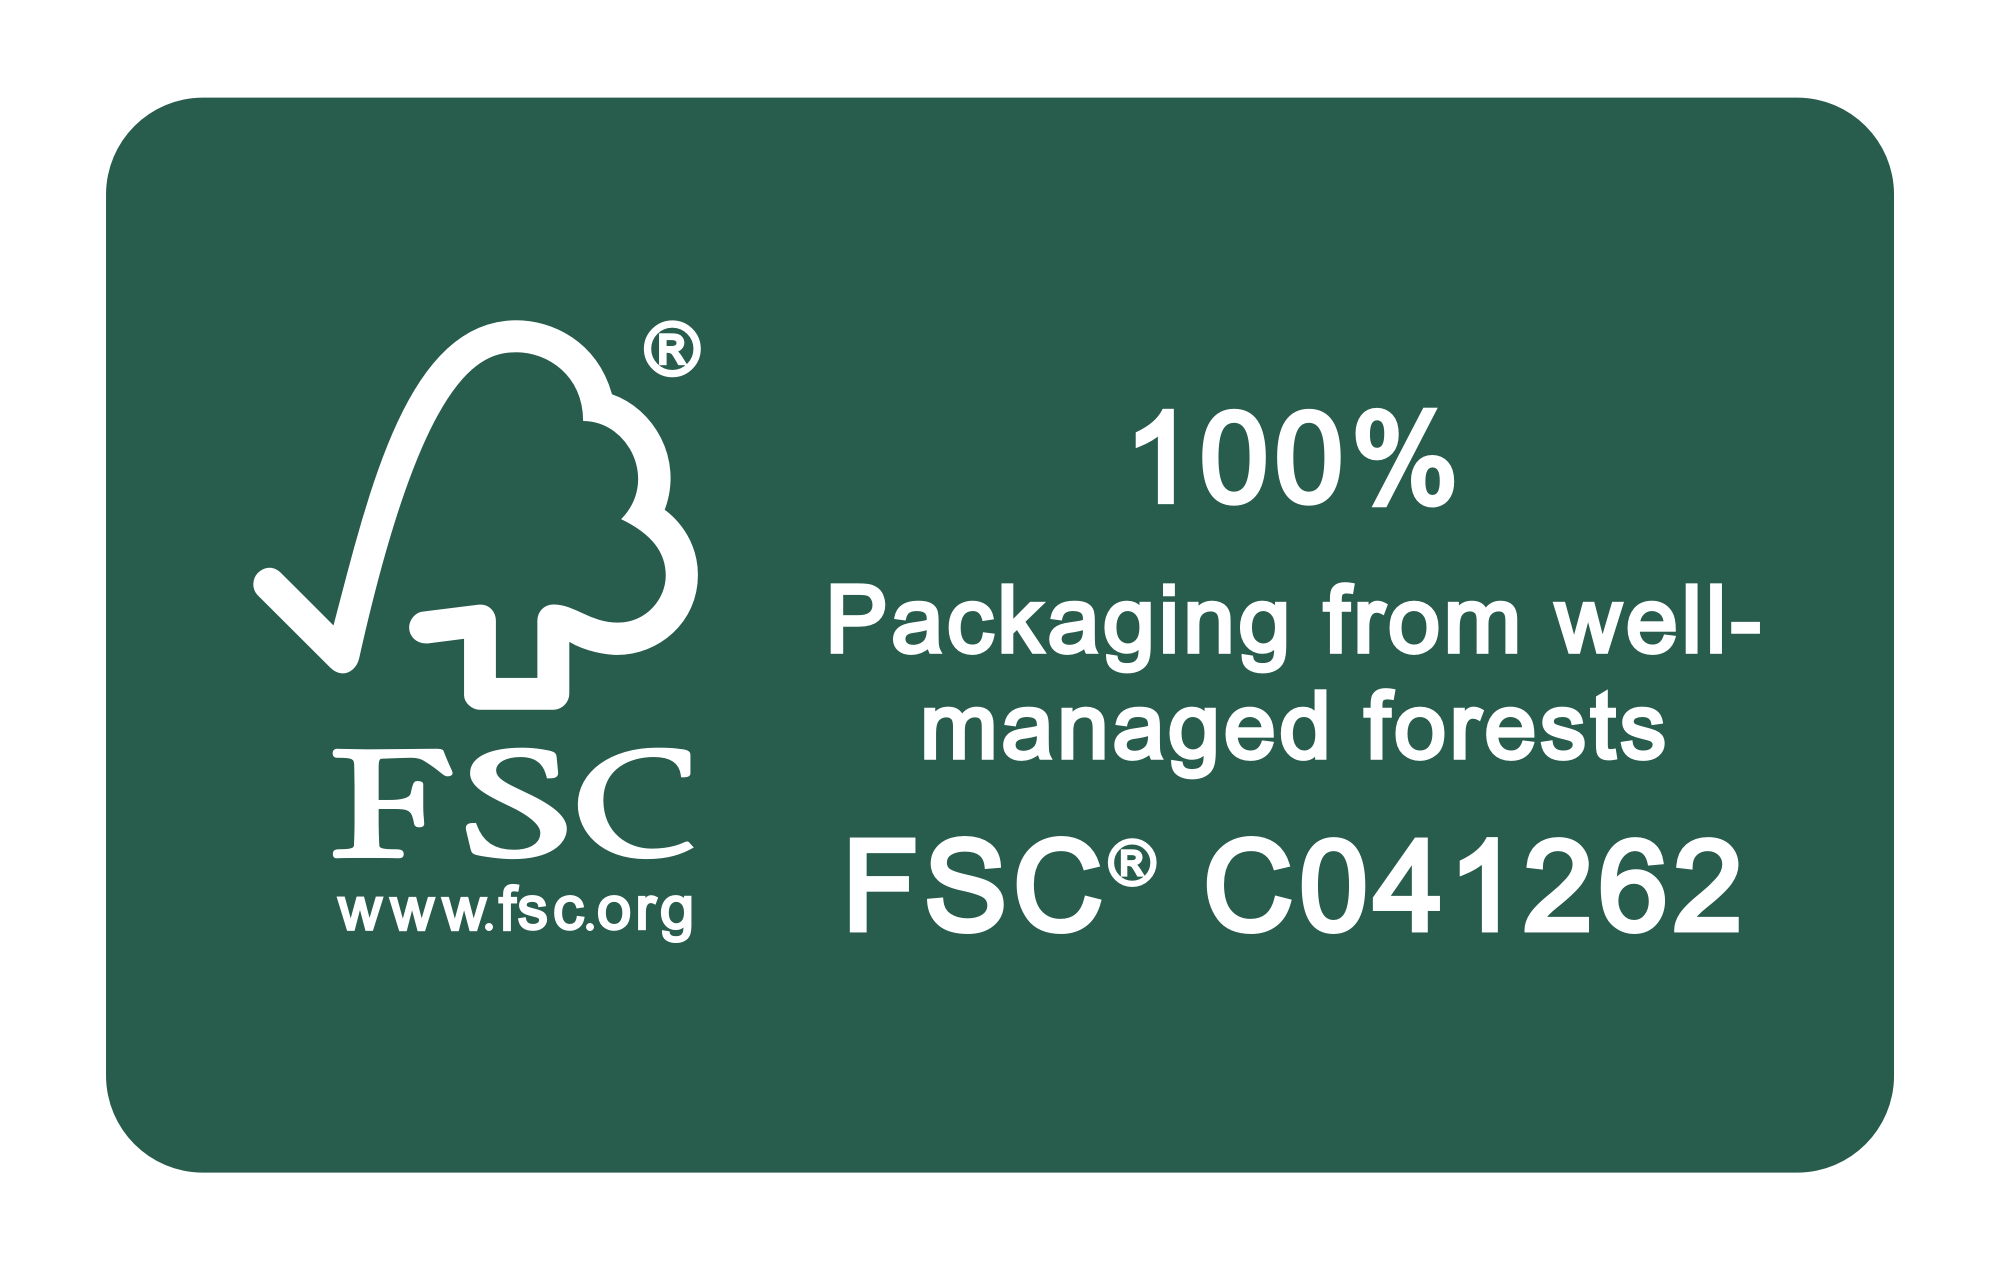 FSC packaging from well-managed forests certificate